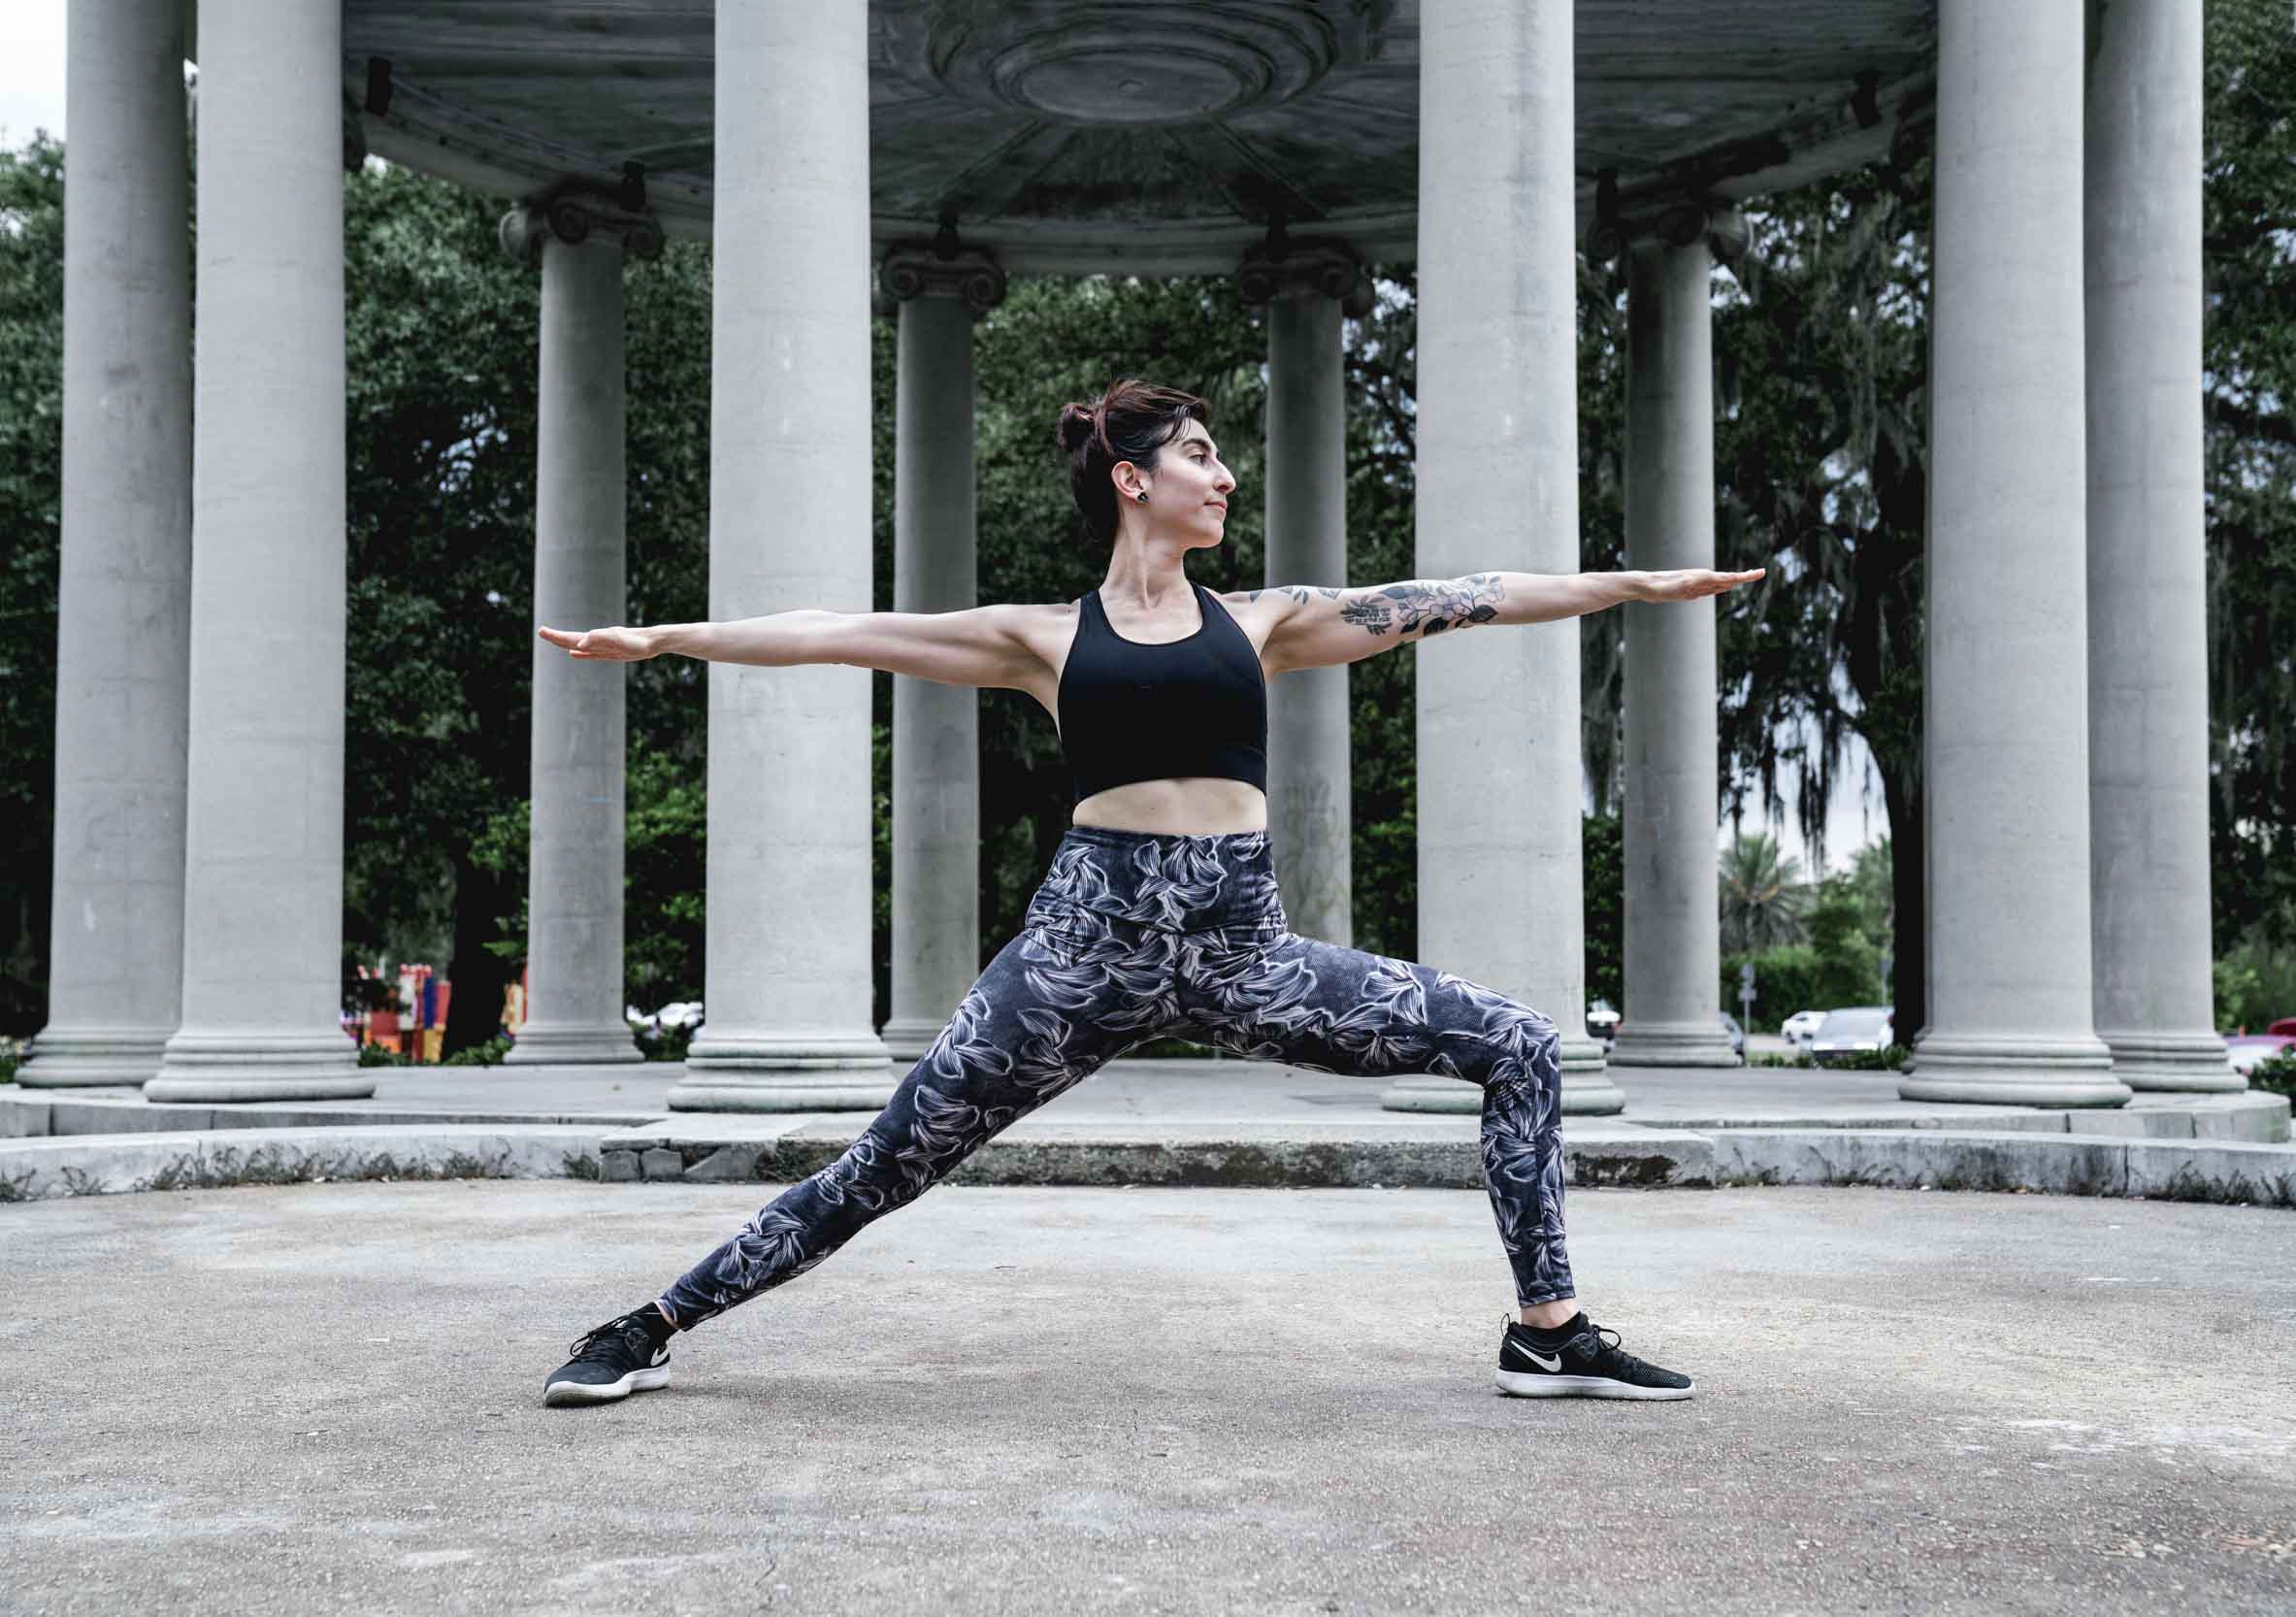 Yoga teacher posing in front of monument in New Orleans park